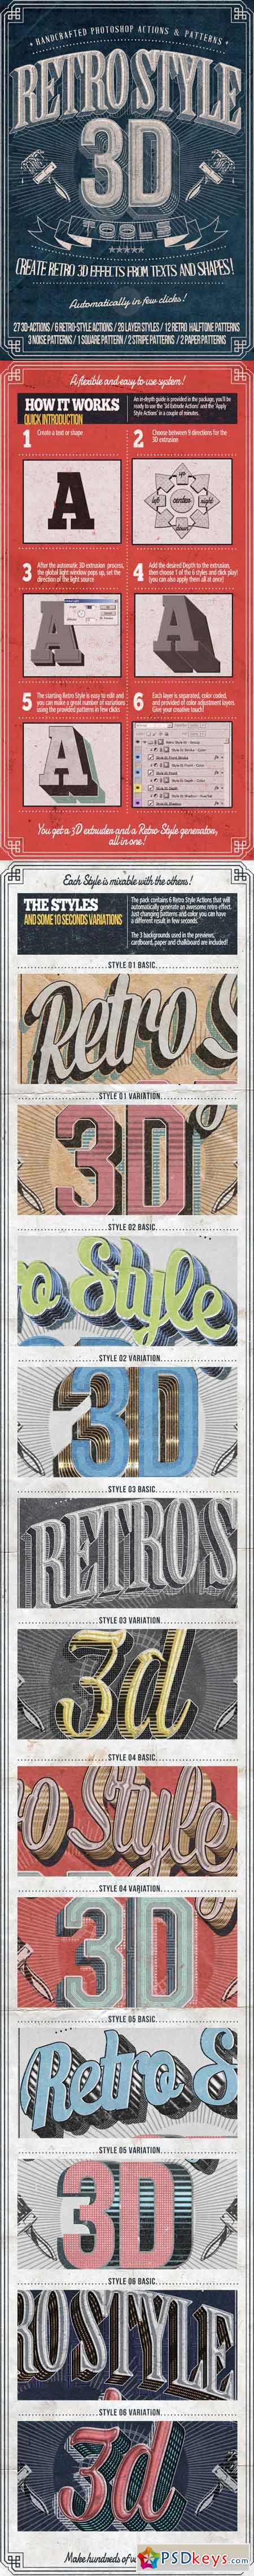 Retro Style 3D Tools - Photoshop Actions 7722029